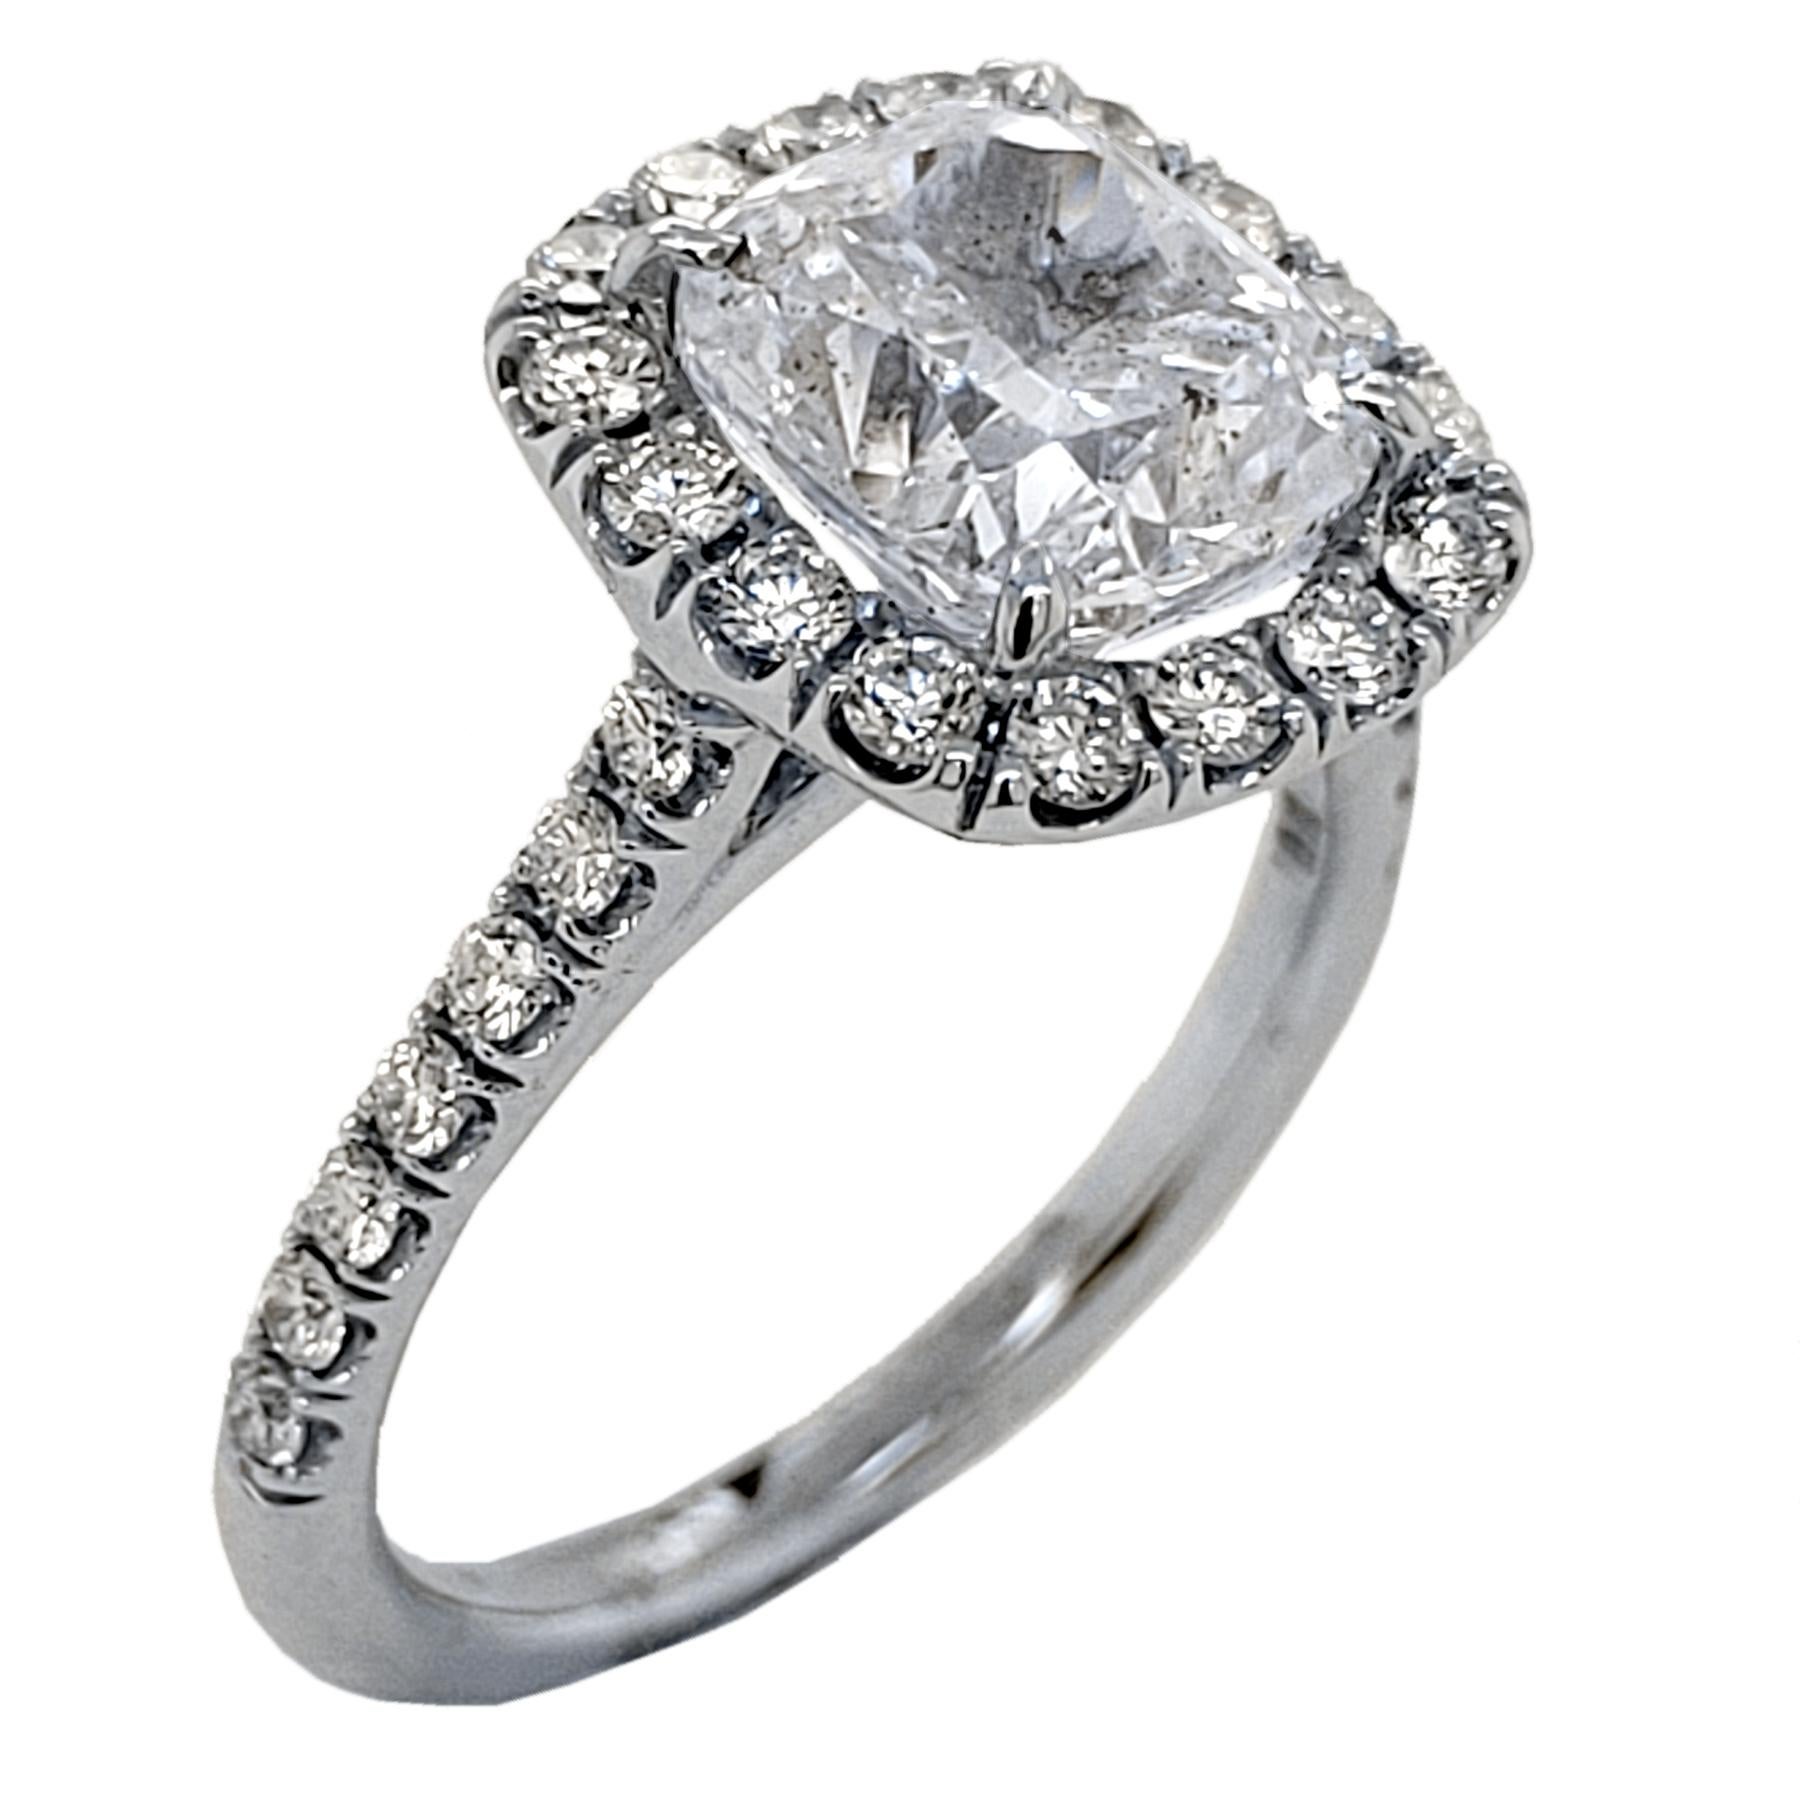 A very shiny 3.01 Ct Cushion E/SI3 EGL US certified center Diamond set in a fine 18k gold Pave set Engagement Ring with a halo. Total diamond weight of 0.58 Ct. on the side. 

Diamond specs:
Center stone: 3.01 Ct EGL US Certified E/SI3 Cushion